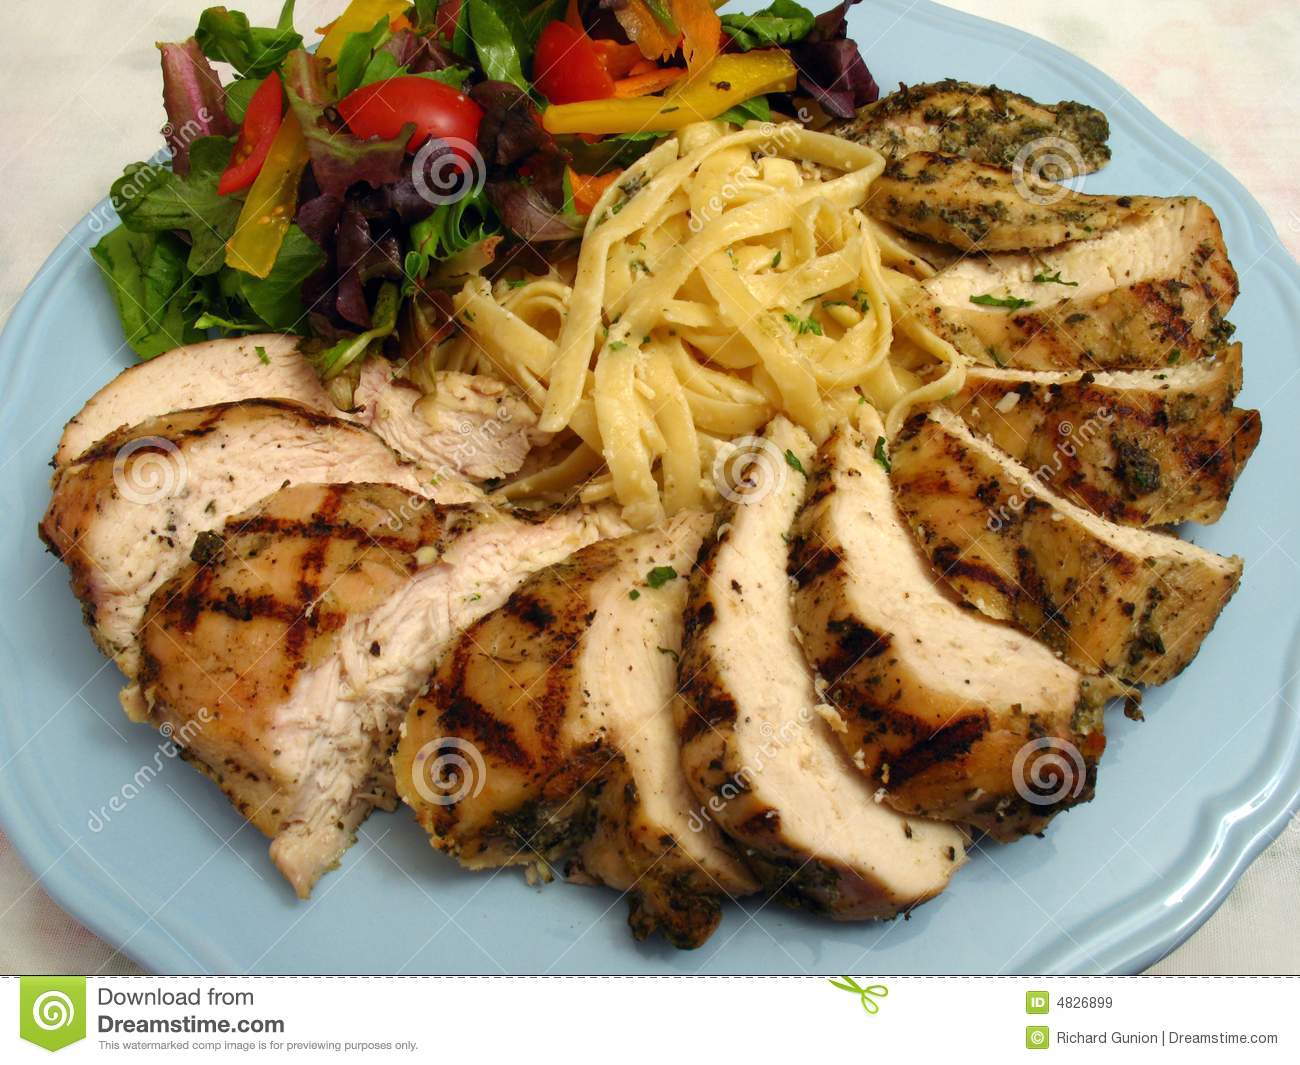 Photo Of Grilled Chicken And Fettuccine Alfredo Dish Served With Salad